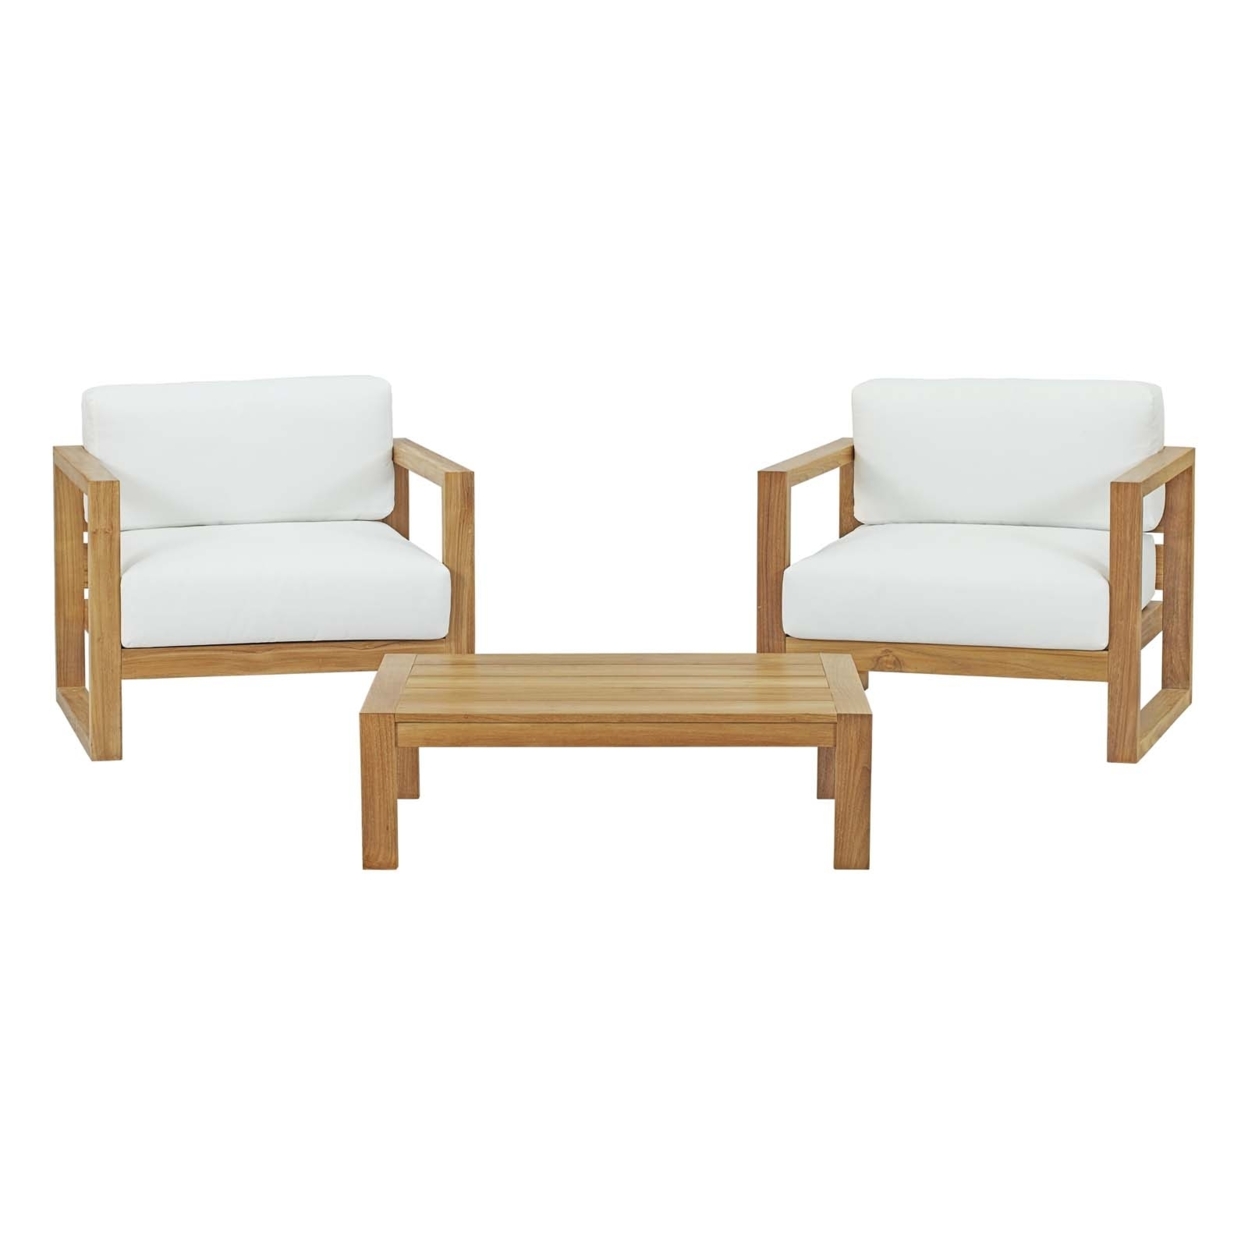 3 Piece Outdoor Seating Set, Natural Teak Frame, 1 Coffee Table